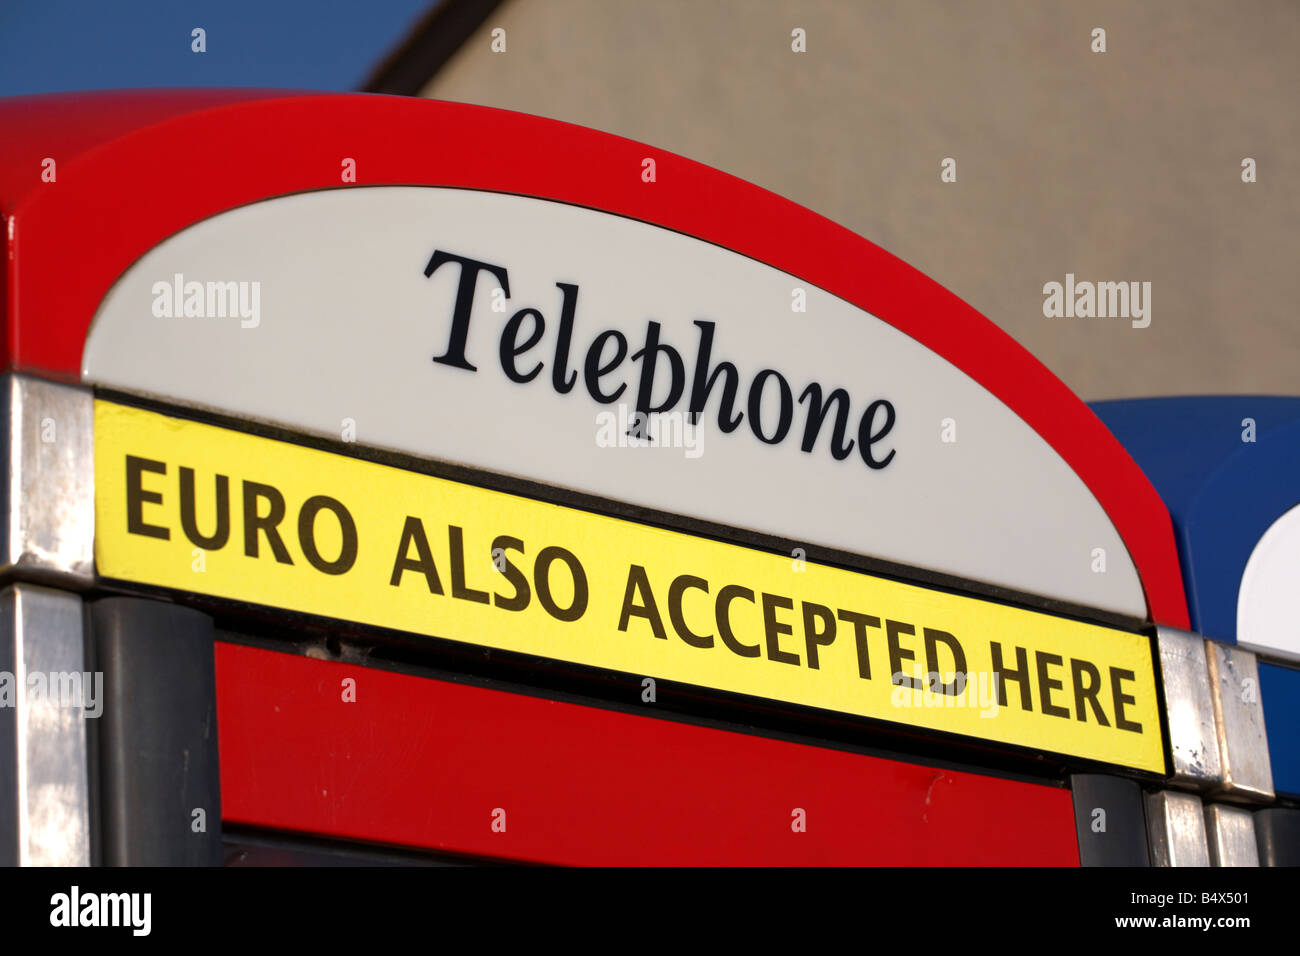 BT telephone phone box with euro also accepted here sign in newcastle county down northern ireland uk Stock Photo